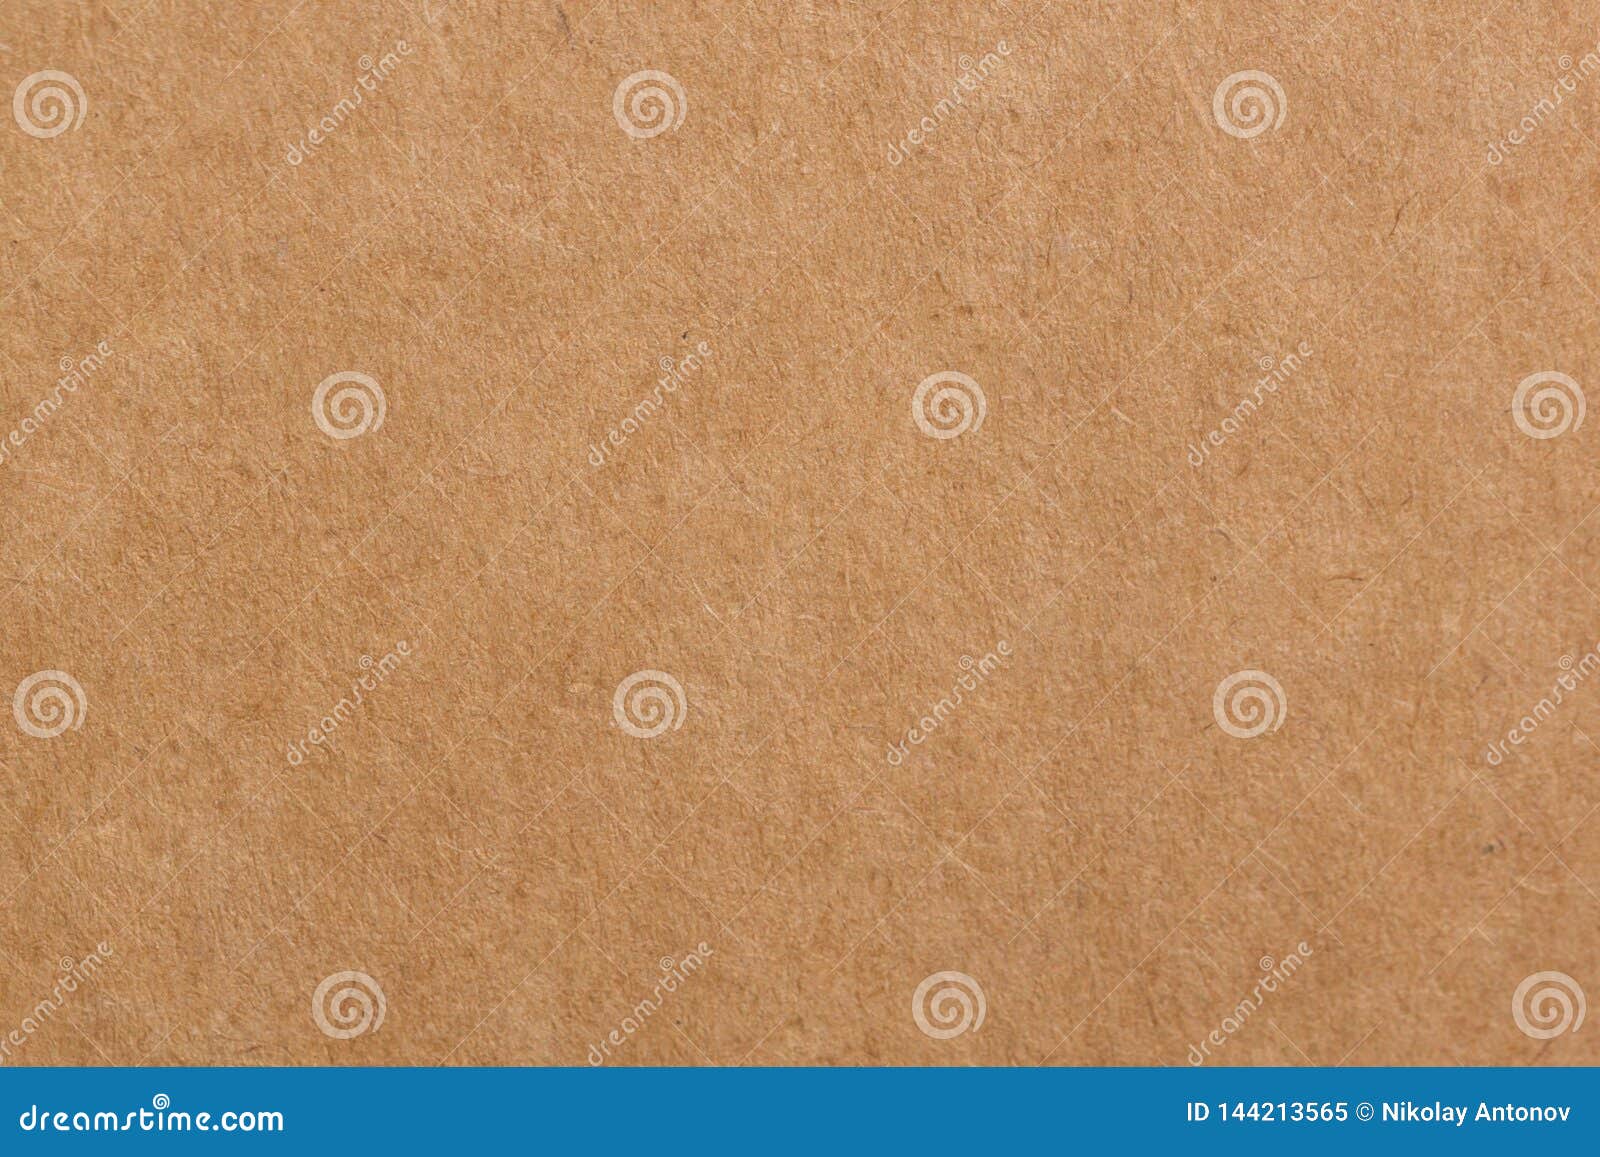 close up recycle cardboard or brown board kraft paper box texture background